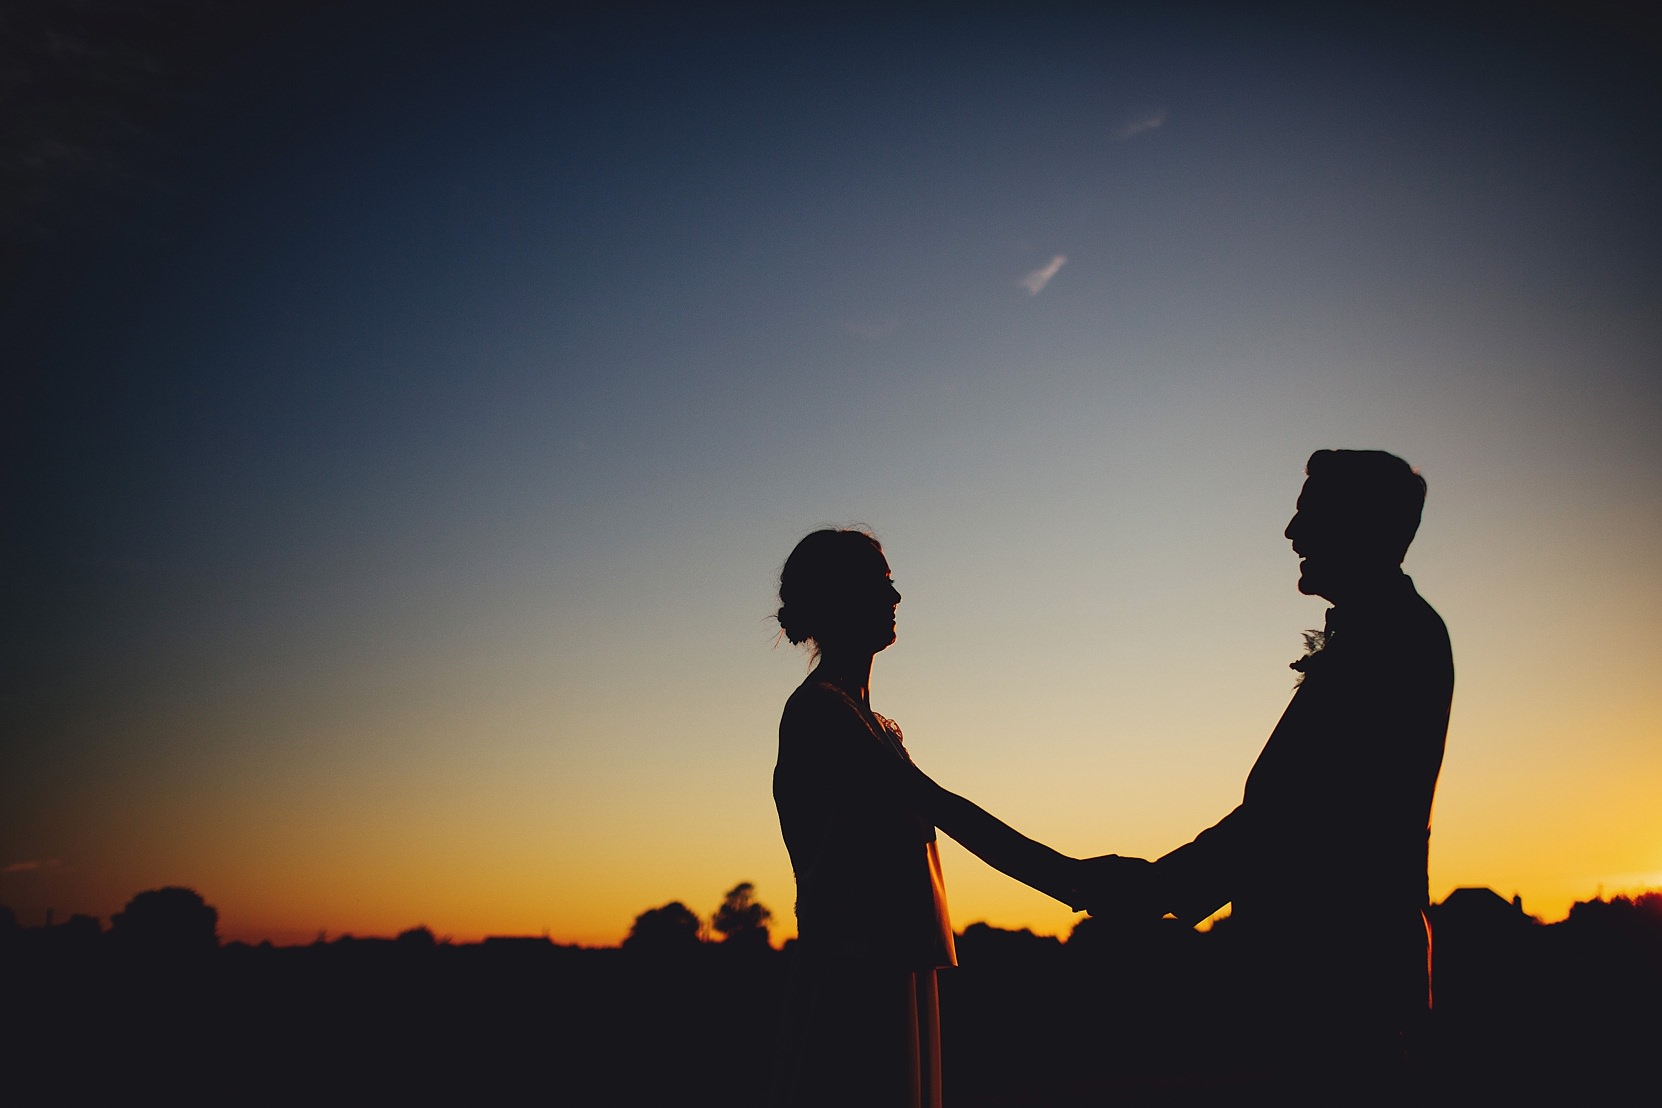 Beautiful shots of a bride and groom at sunset